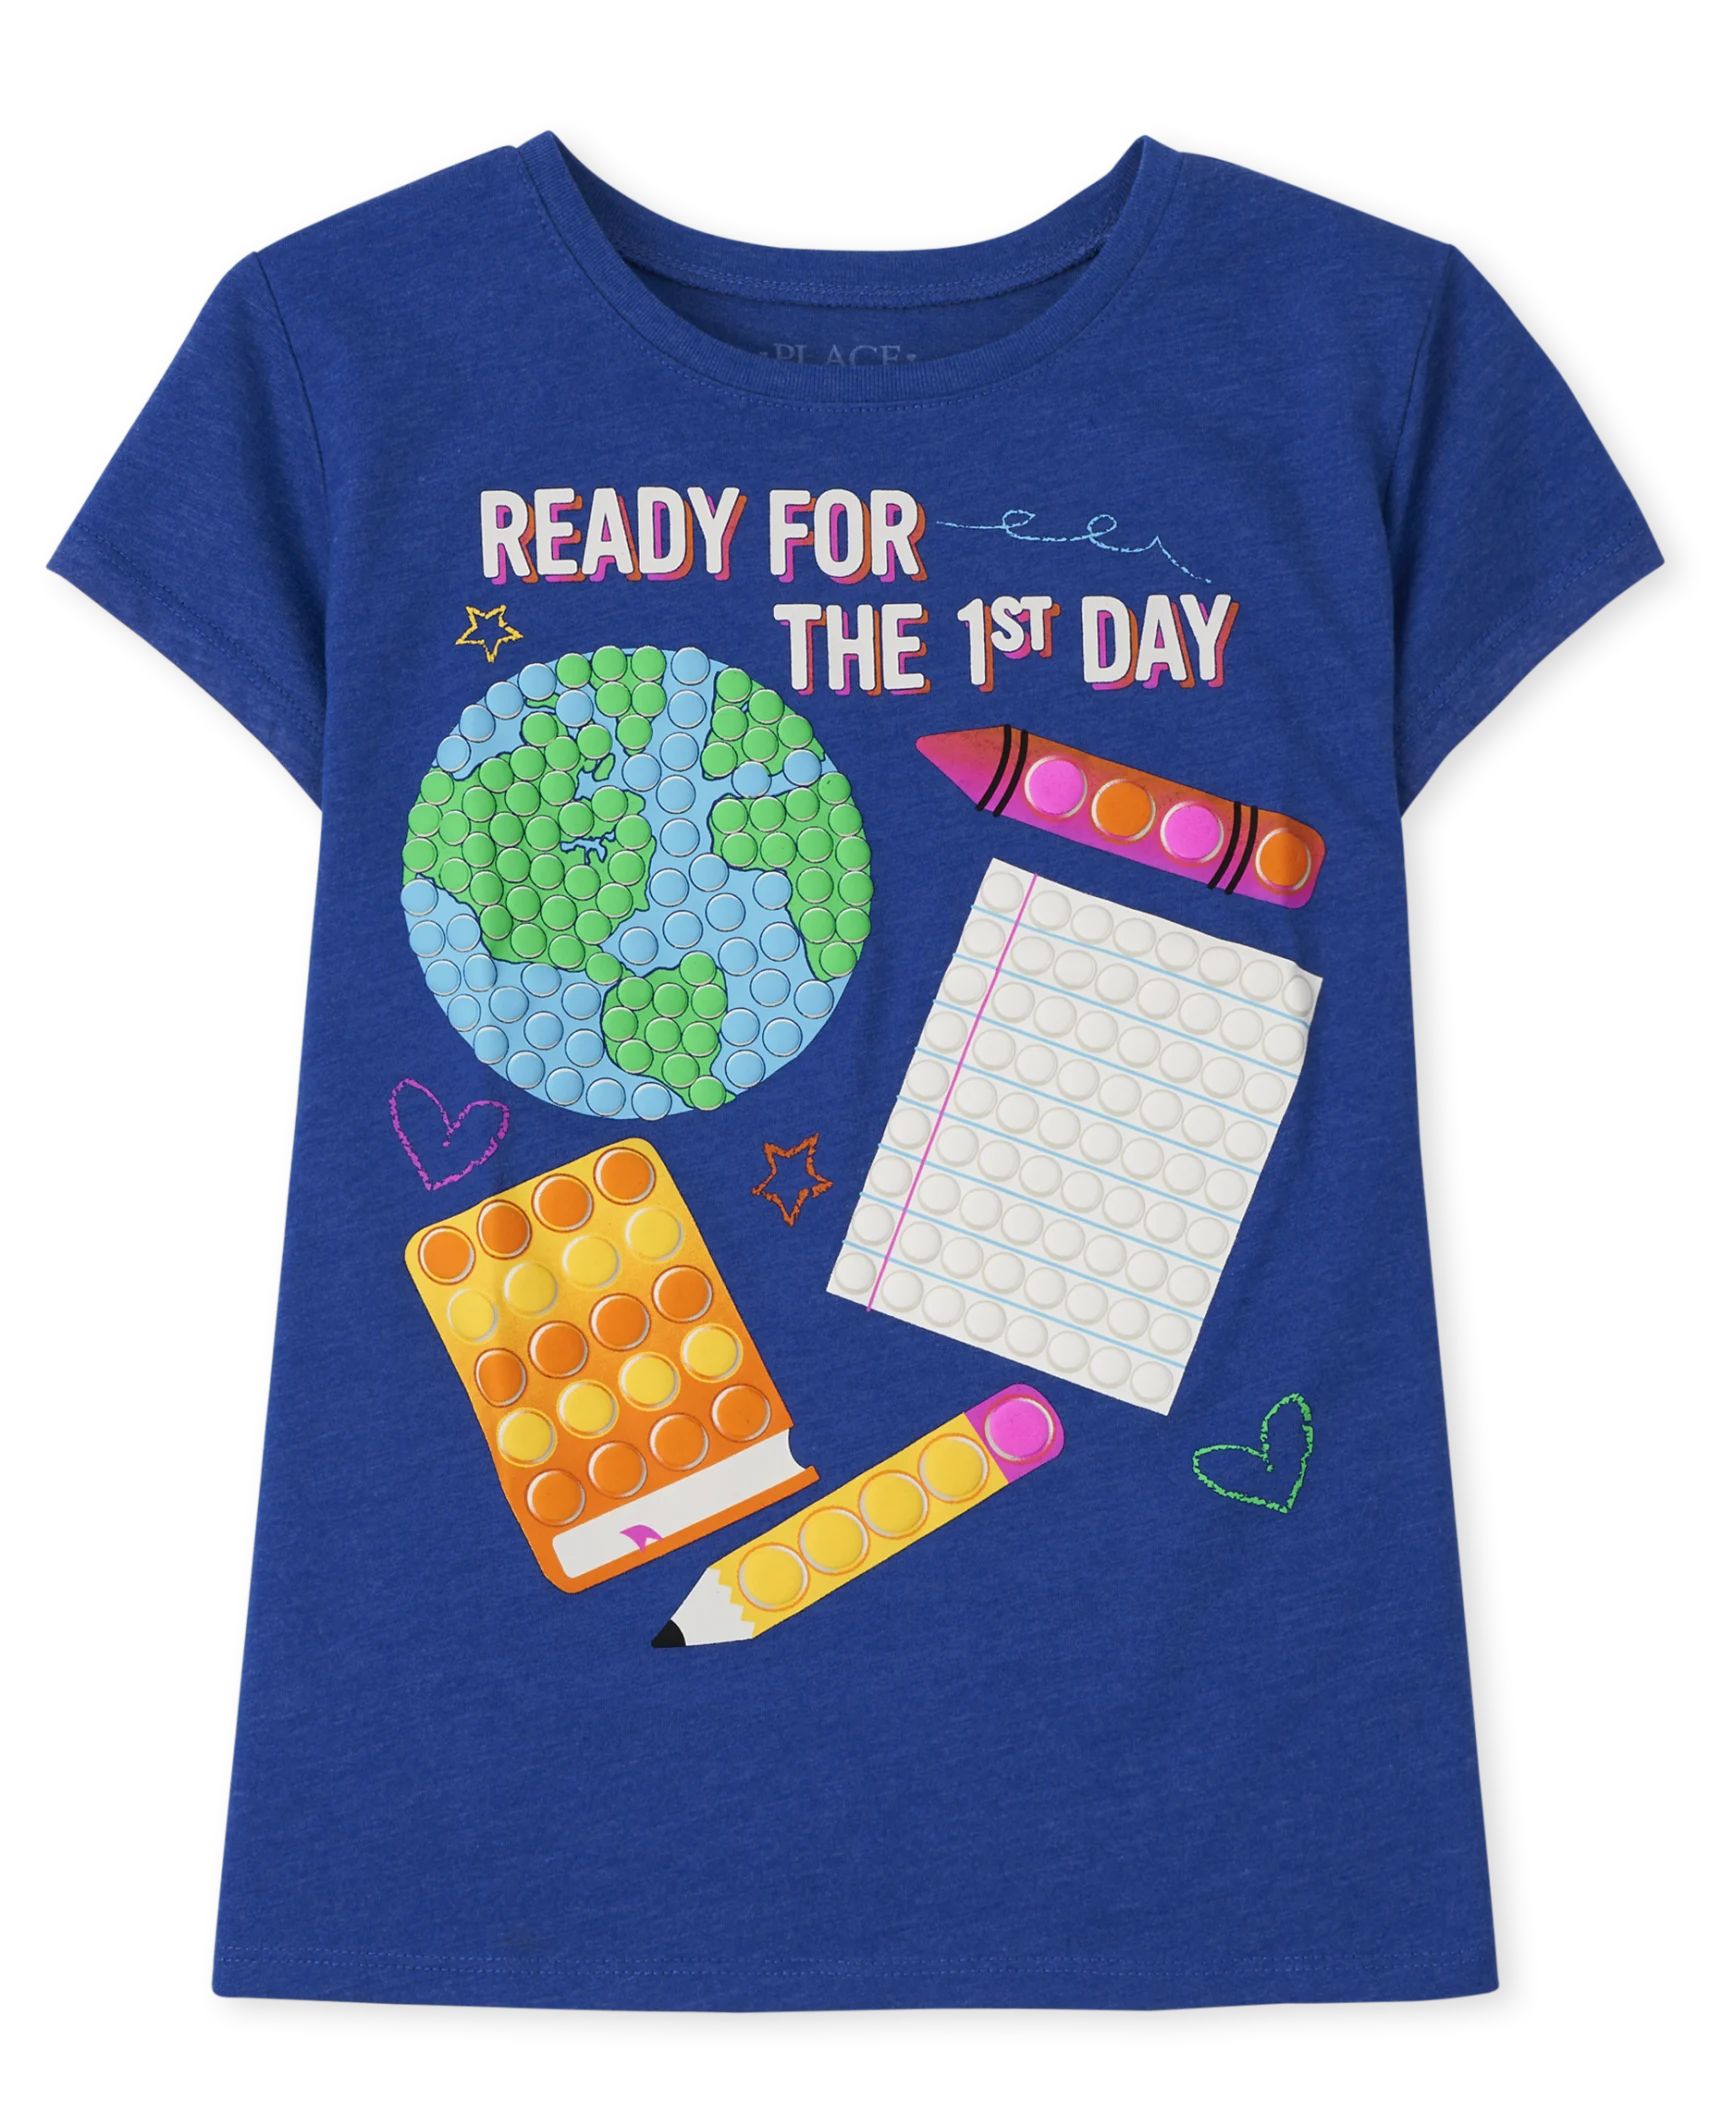 Girls 1st Day Graphic Tee - s/d edgblu | The Children's Place